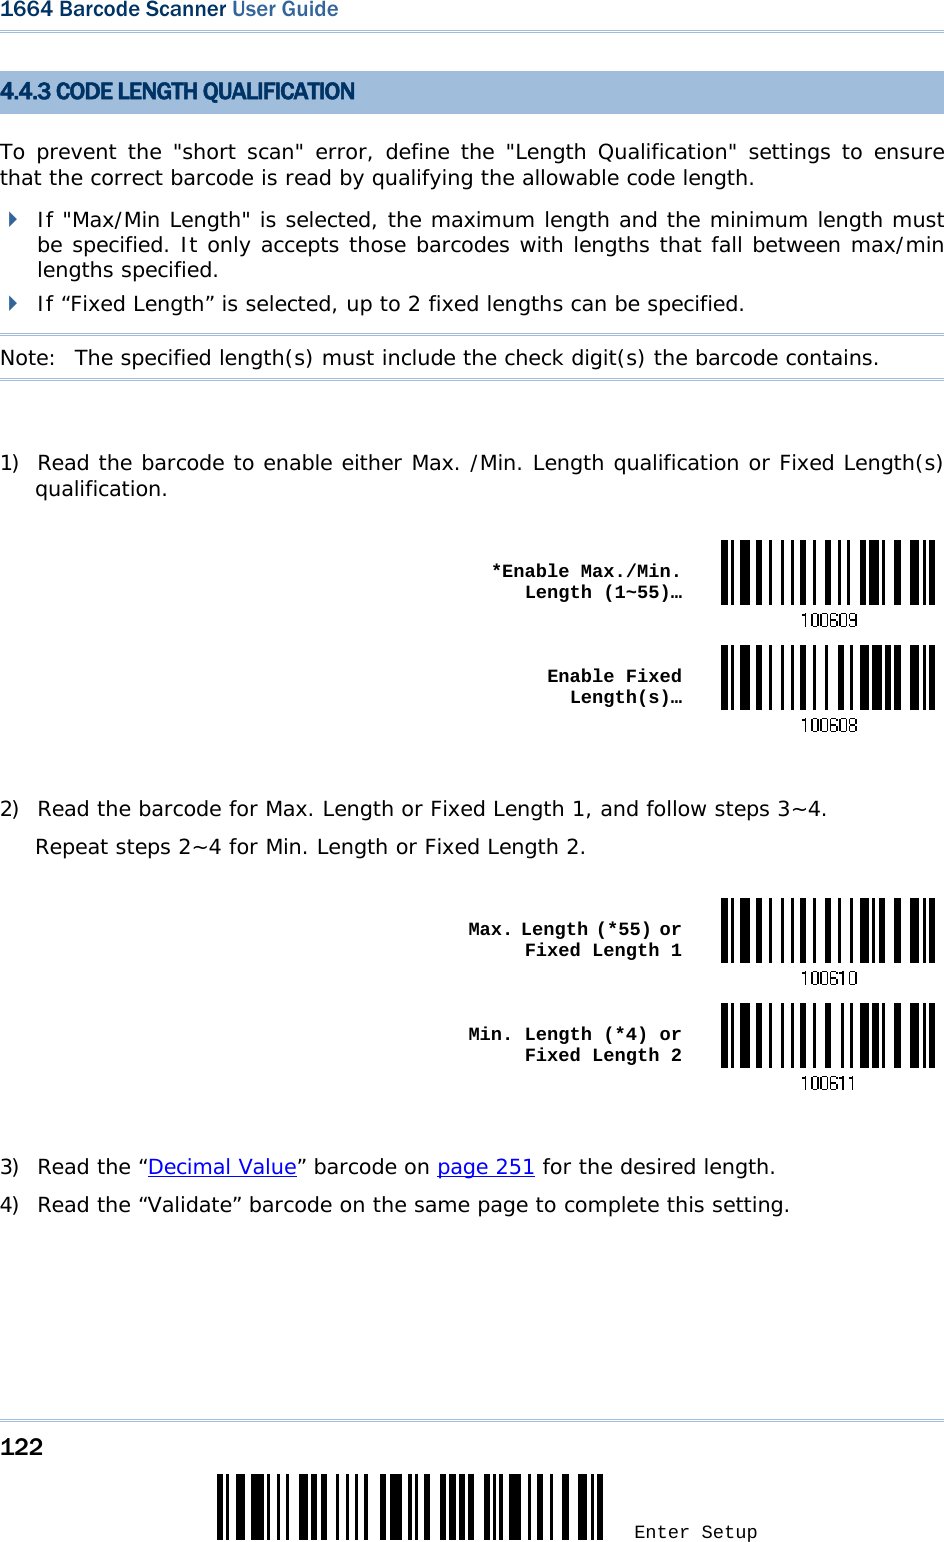 122 Enter Setup 1664 Barcode Scanner User Guide  4.4.3 CODE LENGTH QUALIFICATION To prevent the &quot;short scan&quot; error, define the &quot;Length Qualification&quot; settings to ensure that the correct barcode is read by qualifying the allowable code length.  If &quot;Max/Min Length&quot; is selected, the maximum length and the minimum length must be specified. It only accepts those barcodes with lengths that fall between max/min lengths specified.  If “Fixed Length” is selected, up to 2 fixed lengths can be specified. Note:   The specified length(s) must include the check digit(s) the barcode contains.  1) Read the barcode to enable either Max. /Min. Length qualification or Fixed Length(s) qualification.   *Enable Max./Min. Length (1~55)… Enable Fixed Length(s)… 2) Read the barcode for Max. Length or Fixed Length 1, and follow steps 3~4. Repeat steps 2~4 for Min. Length or Fixed Length 2.   Max. Length (*55) or Fixed Length 1 Min. Length (*4) or Fixed Length 2 3) Read the “Decimal Value” barcode on page 251 for the desired length.  4) Read the “Validate” barcode on the same page to complete this setting. 